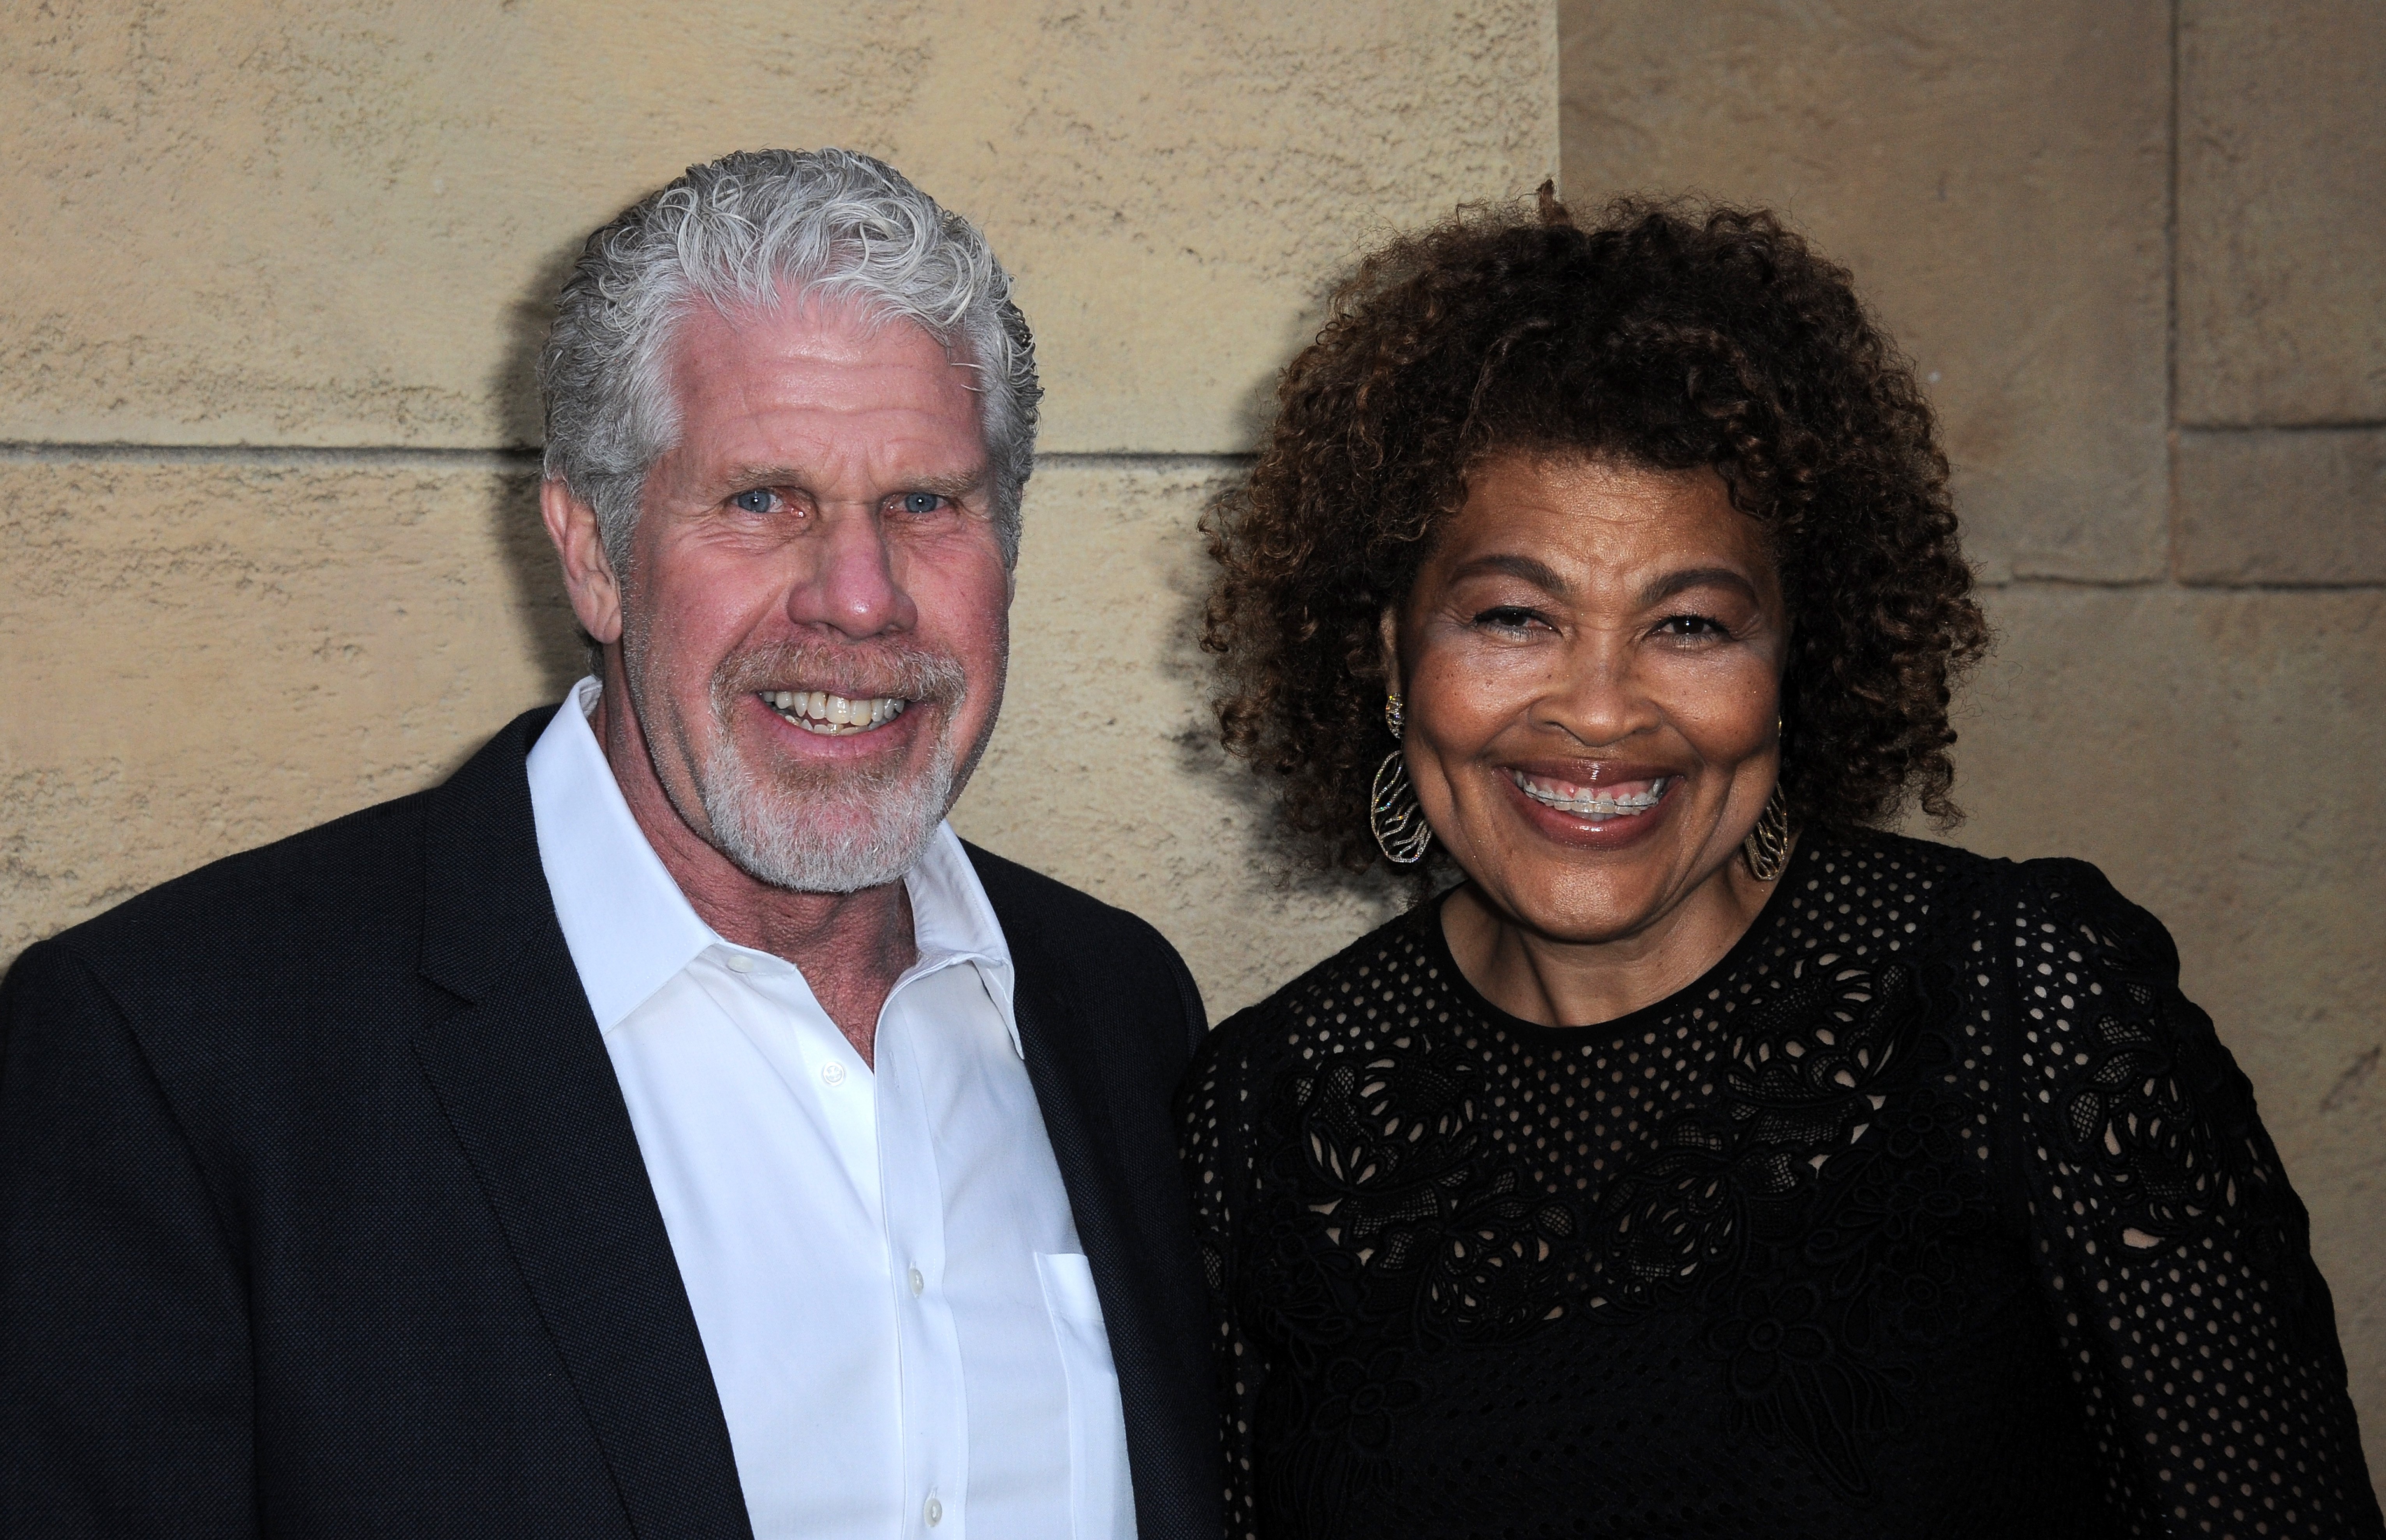 Ron Perlman and his wife Opal Perlman at the premiere of "Skin Trade" on May 6, 2015, in Hollywood, California | Source: Getty Images